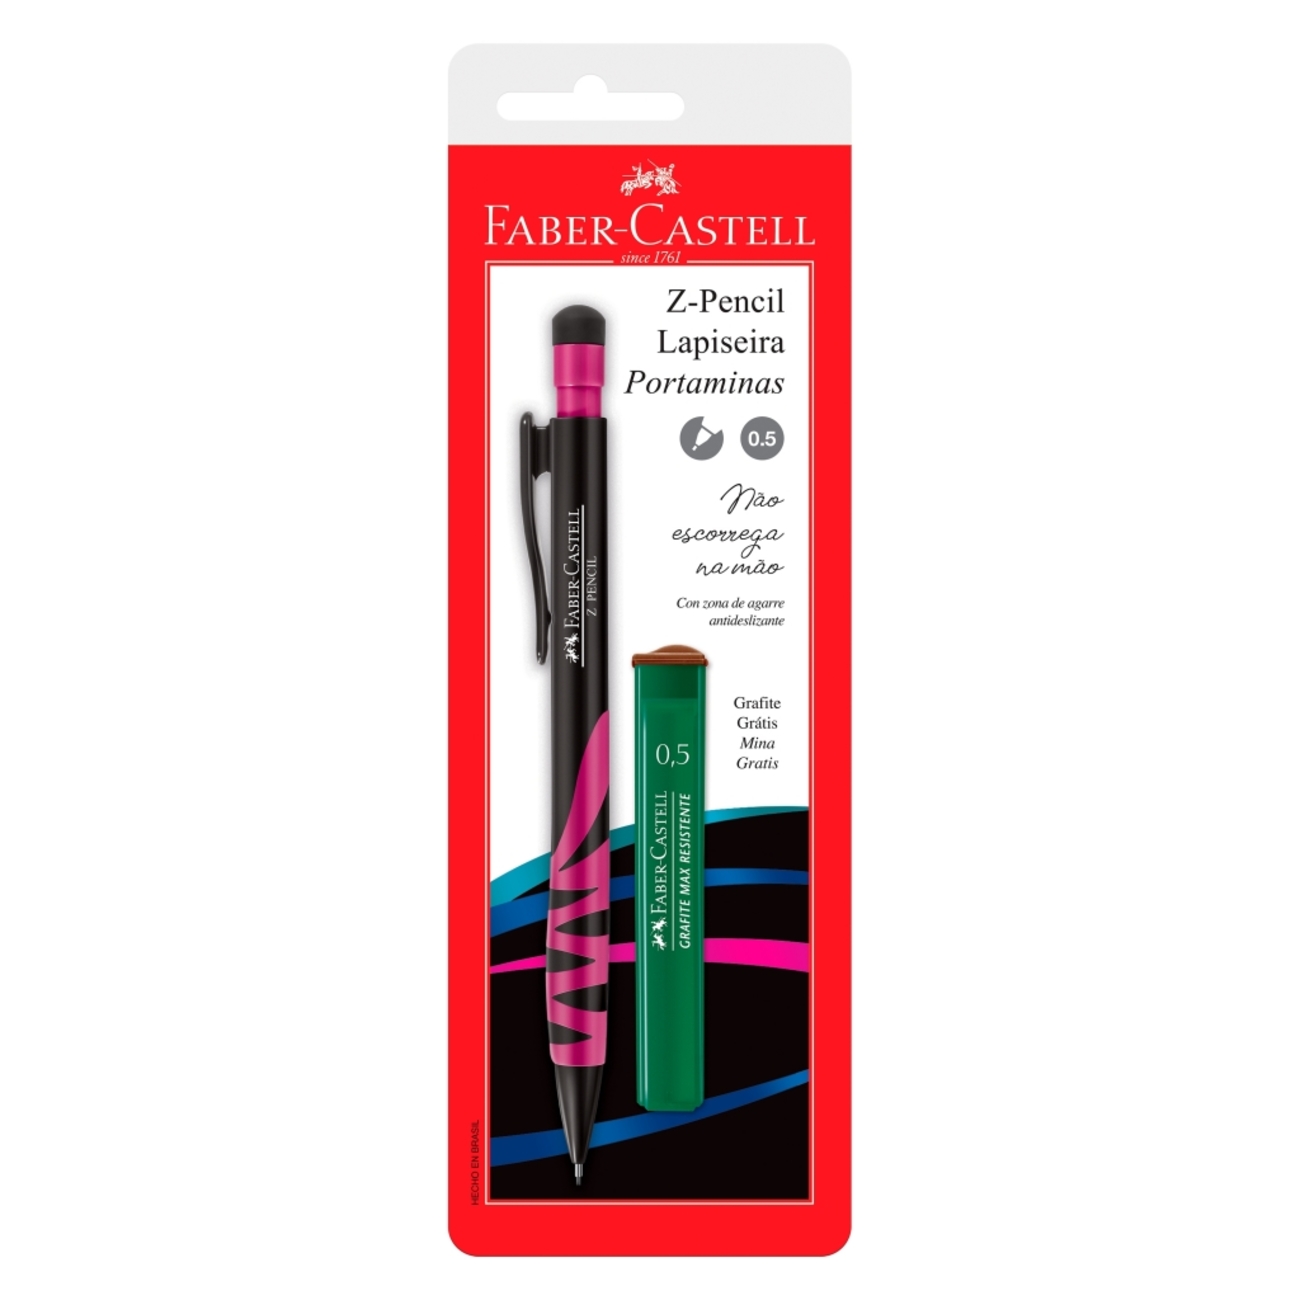 Lapiseira Faber-Castell ZPencil 0.5mm Ctl c/ 1 Unid (24 Ctl/cada)